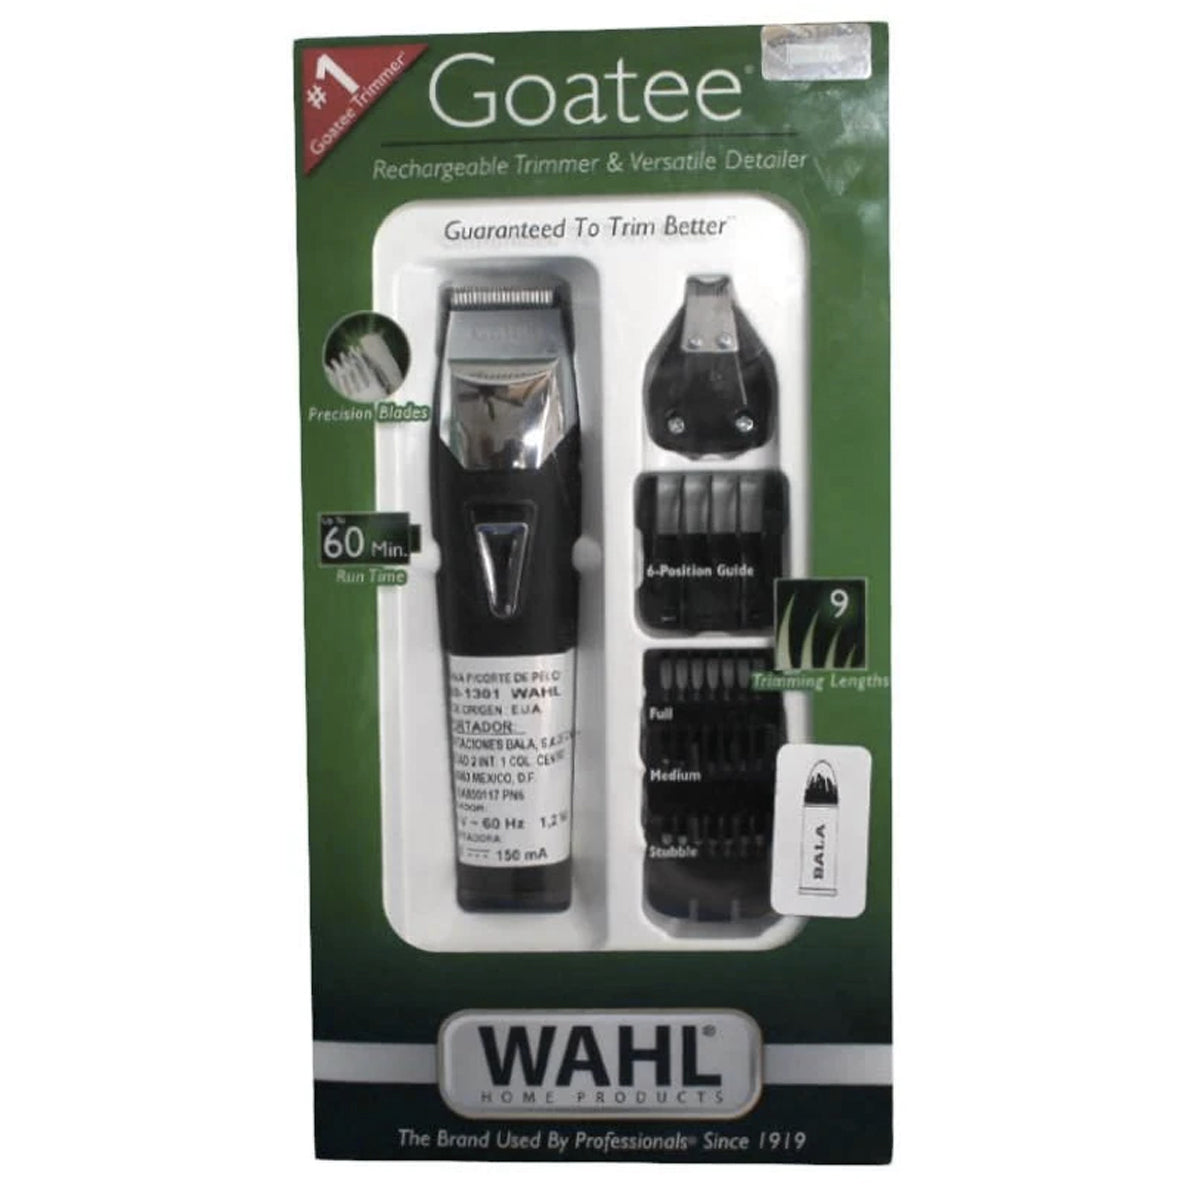 MAQUINA GOATEE TRIMMER WAHL ( 9860-1301 )